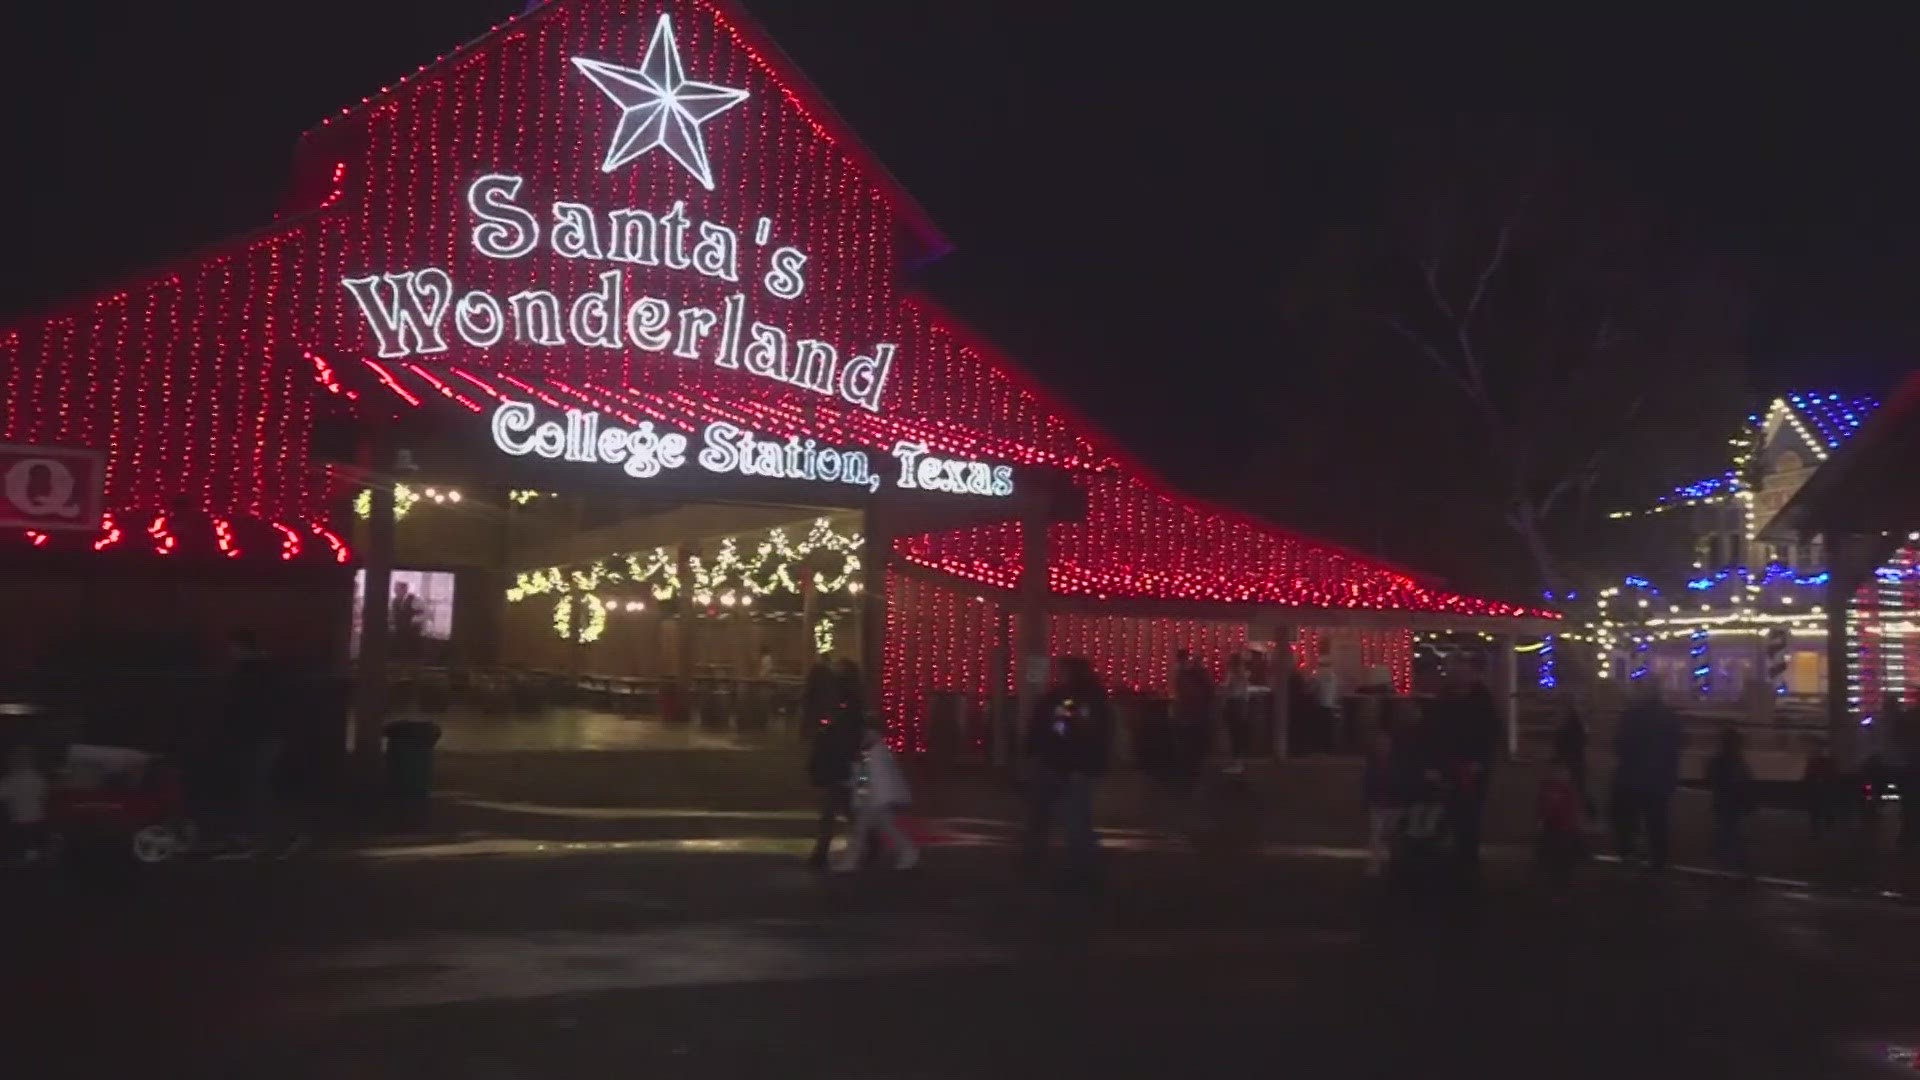 Everything is bigger in Texas, including this Christmas wonderland.